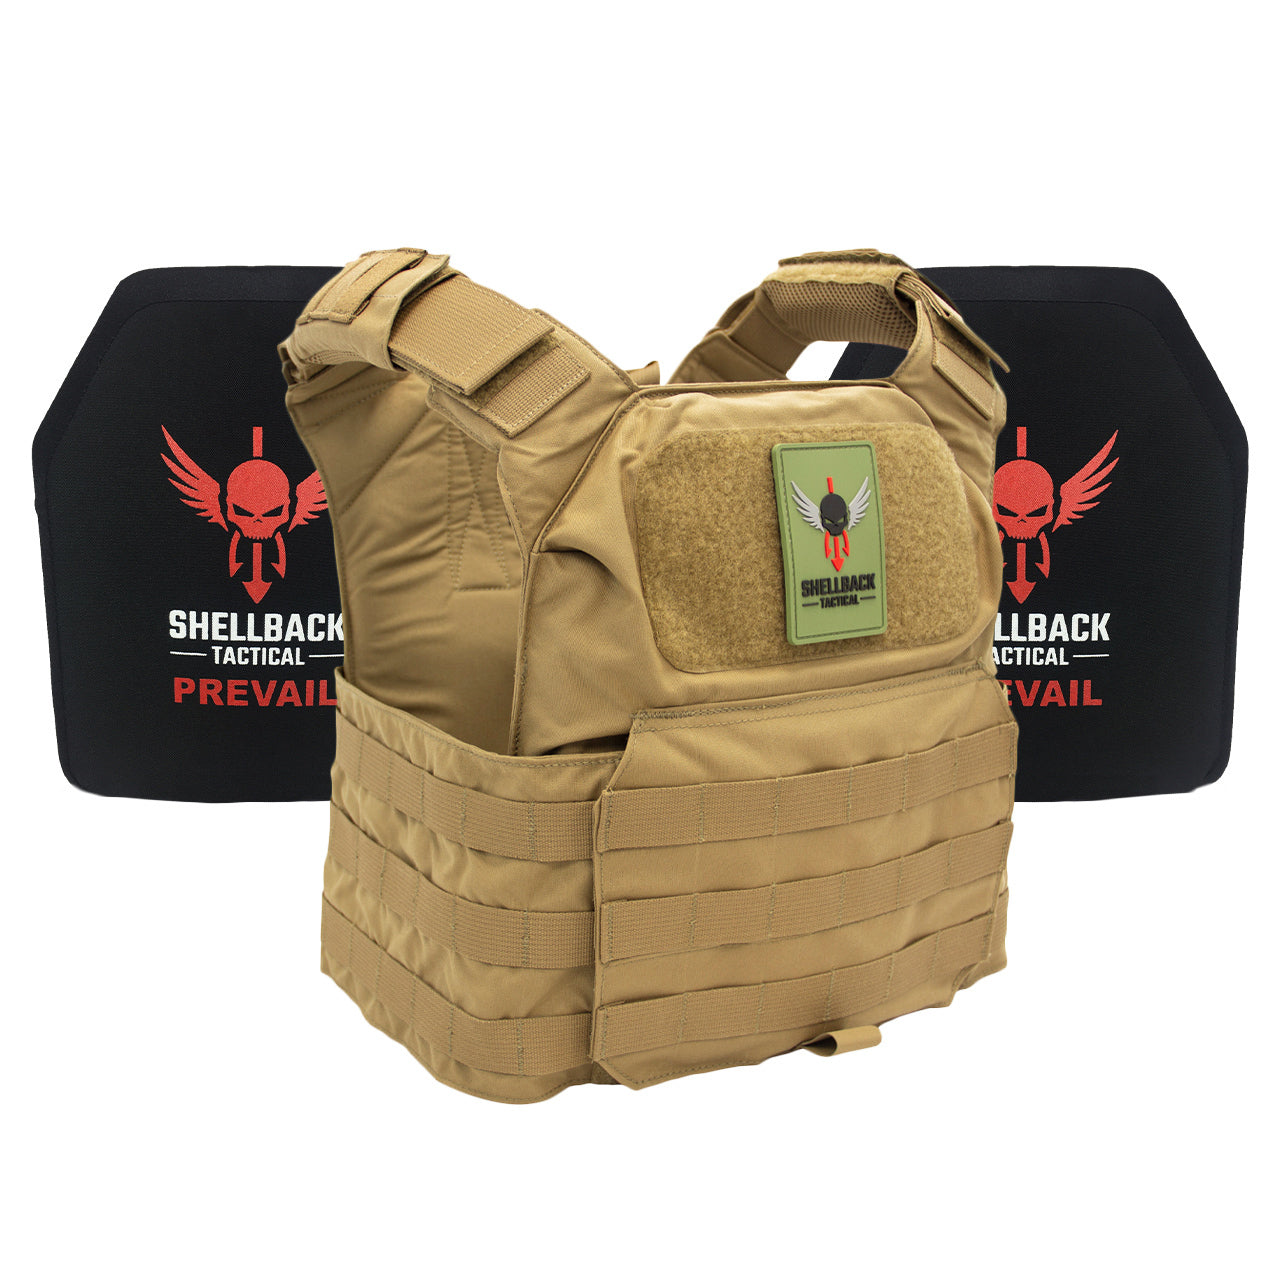 A Shellback Tactical Patriot Active Shooter Kit with Level IV Model 1155 Armor Plates Ranger Green plate carrier with the word rebarack on it.